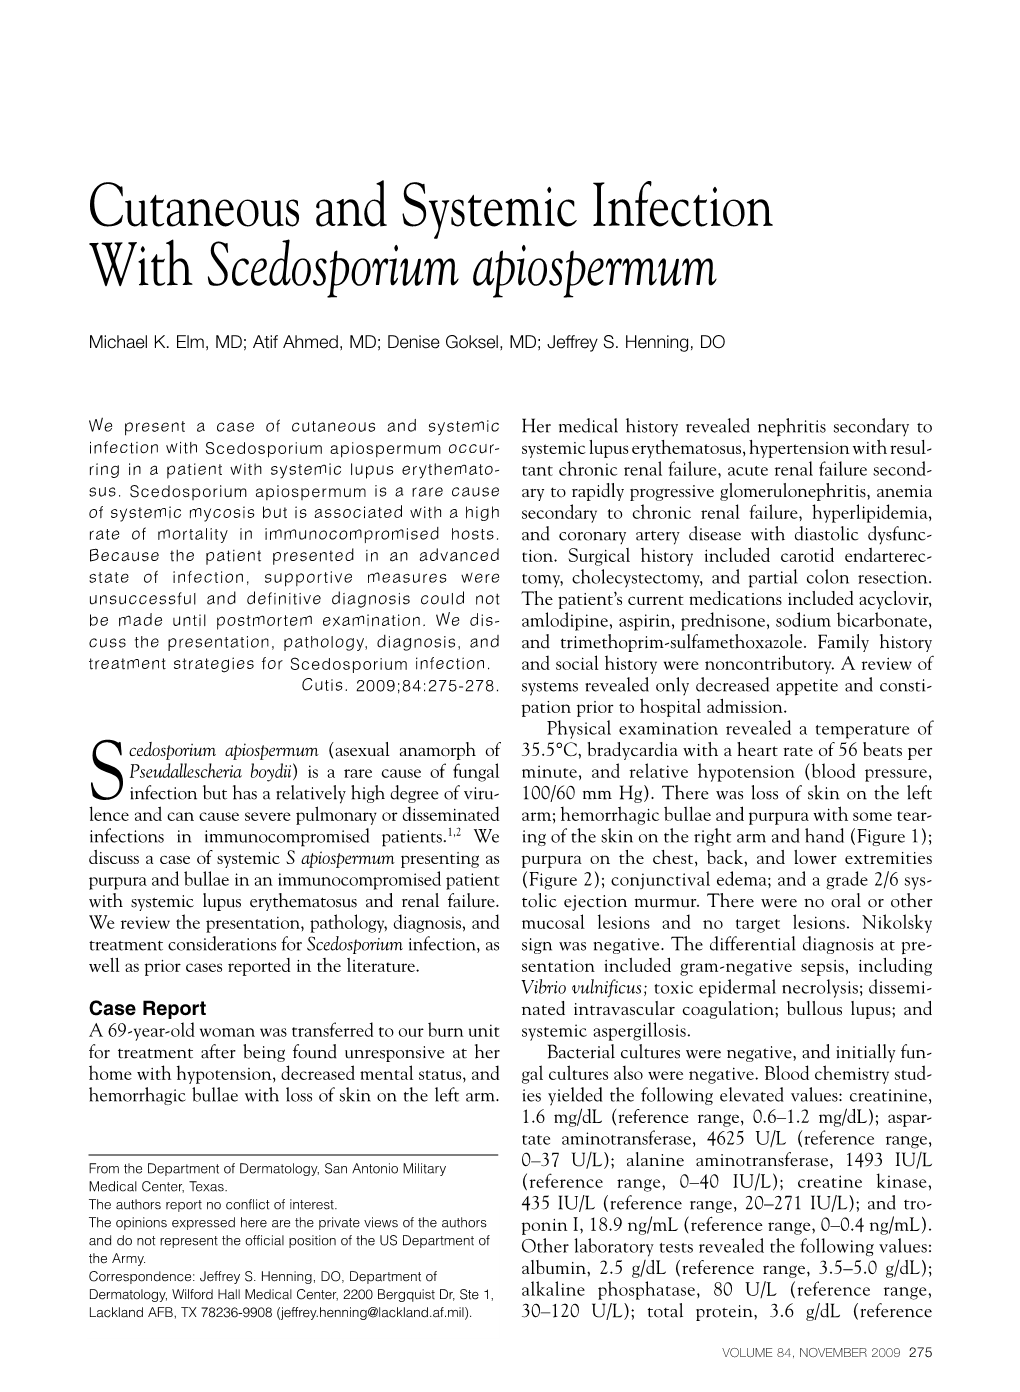 Cutaneous and Systemic Infection with Scedosporium Apiospermum